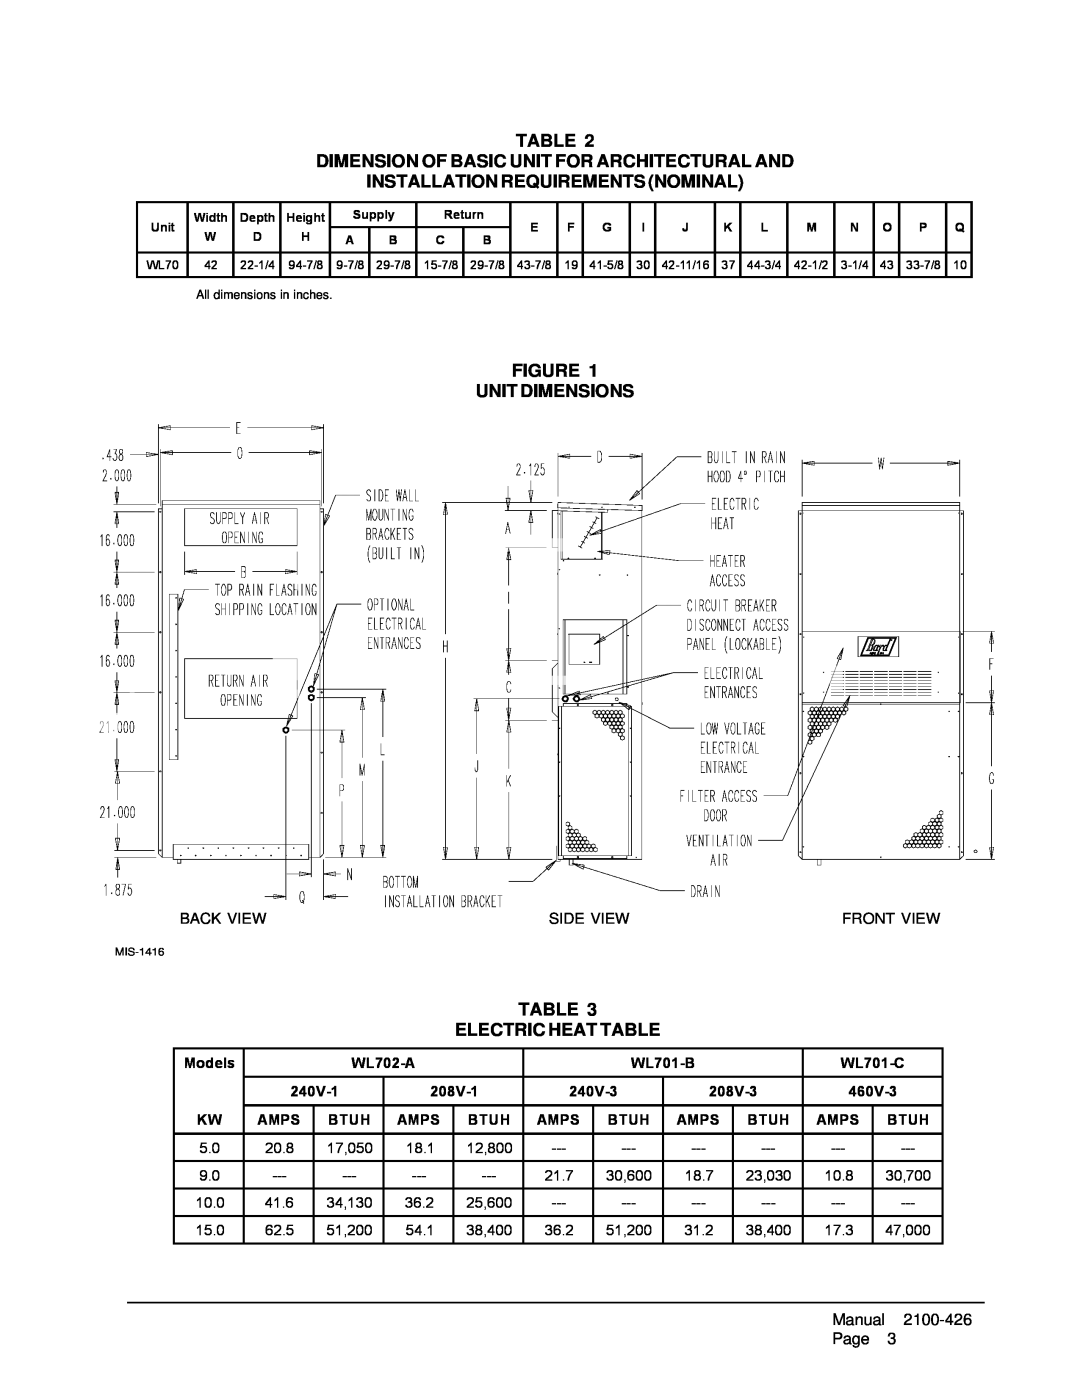 Bard WL702-A Dimension Of Basic Unit For Architectural And, Installation Requirements Nominal, Figure Unit Dimensions 